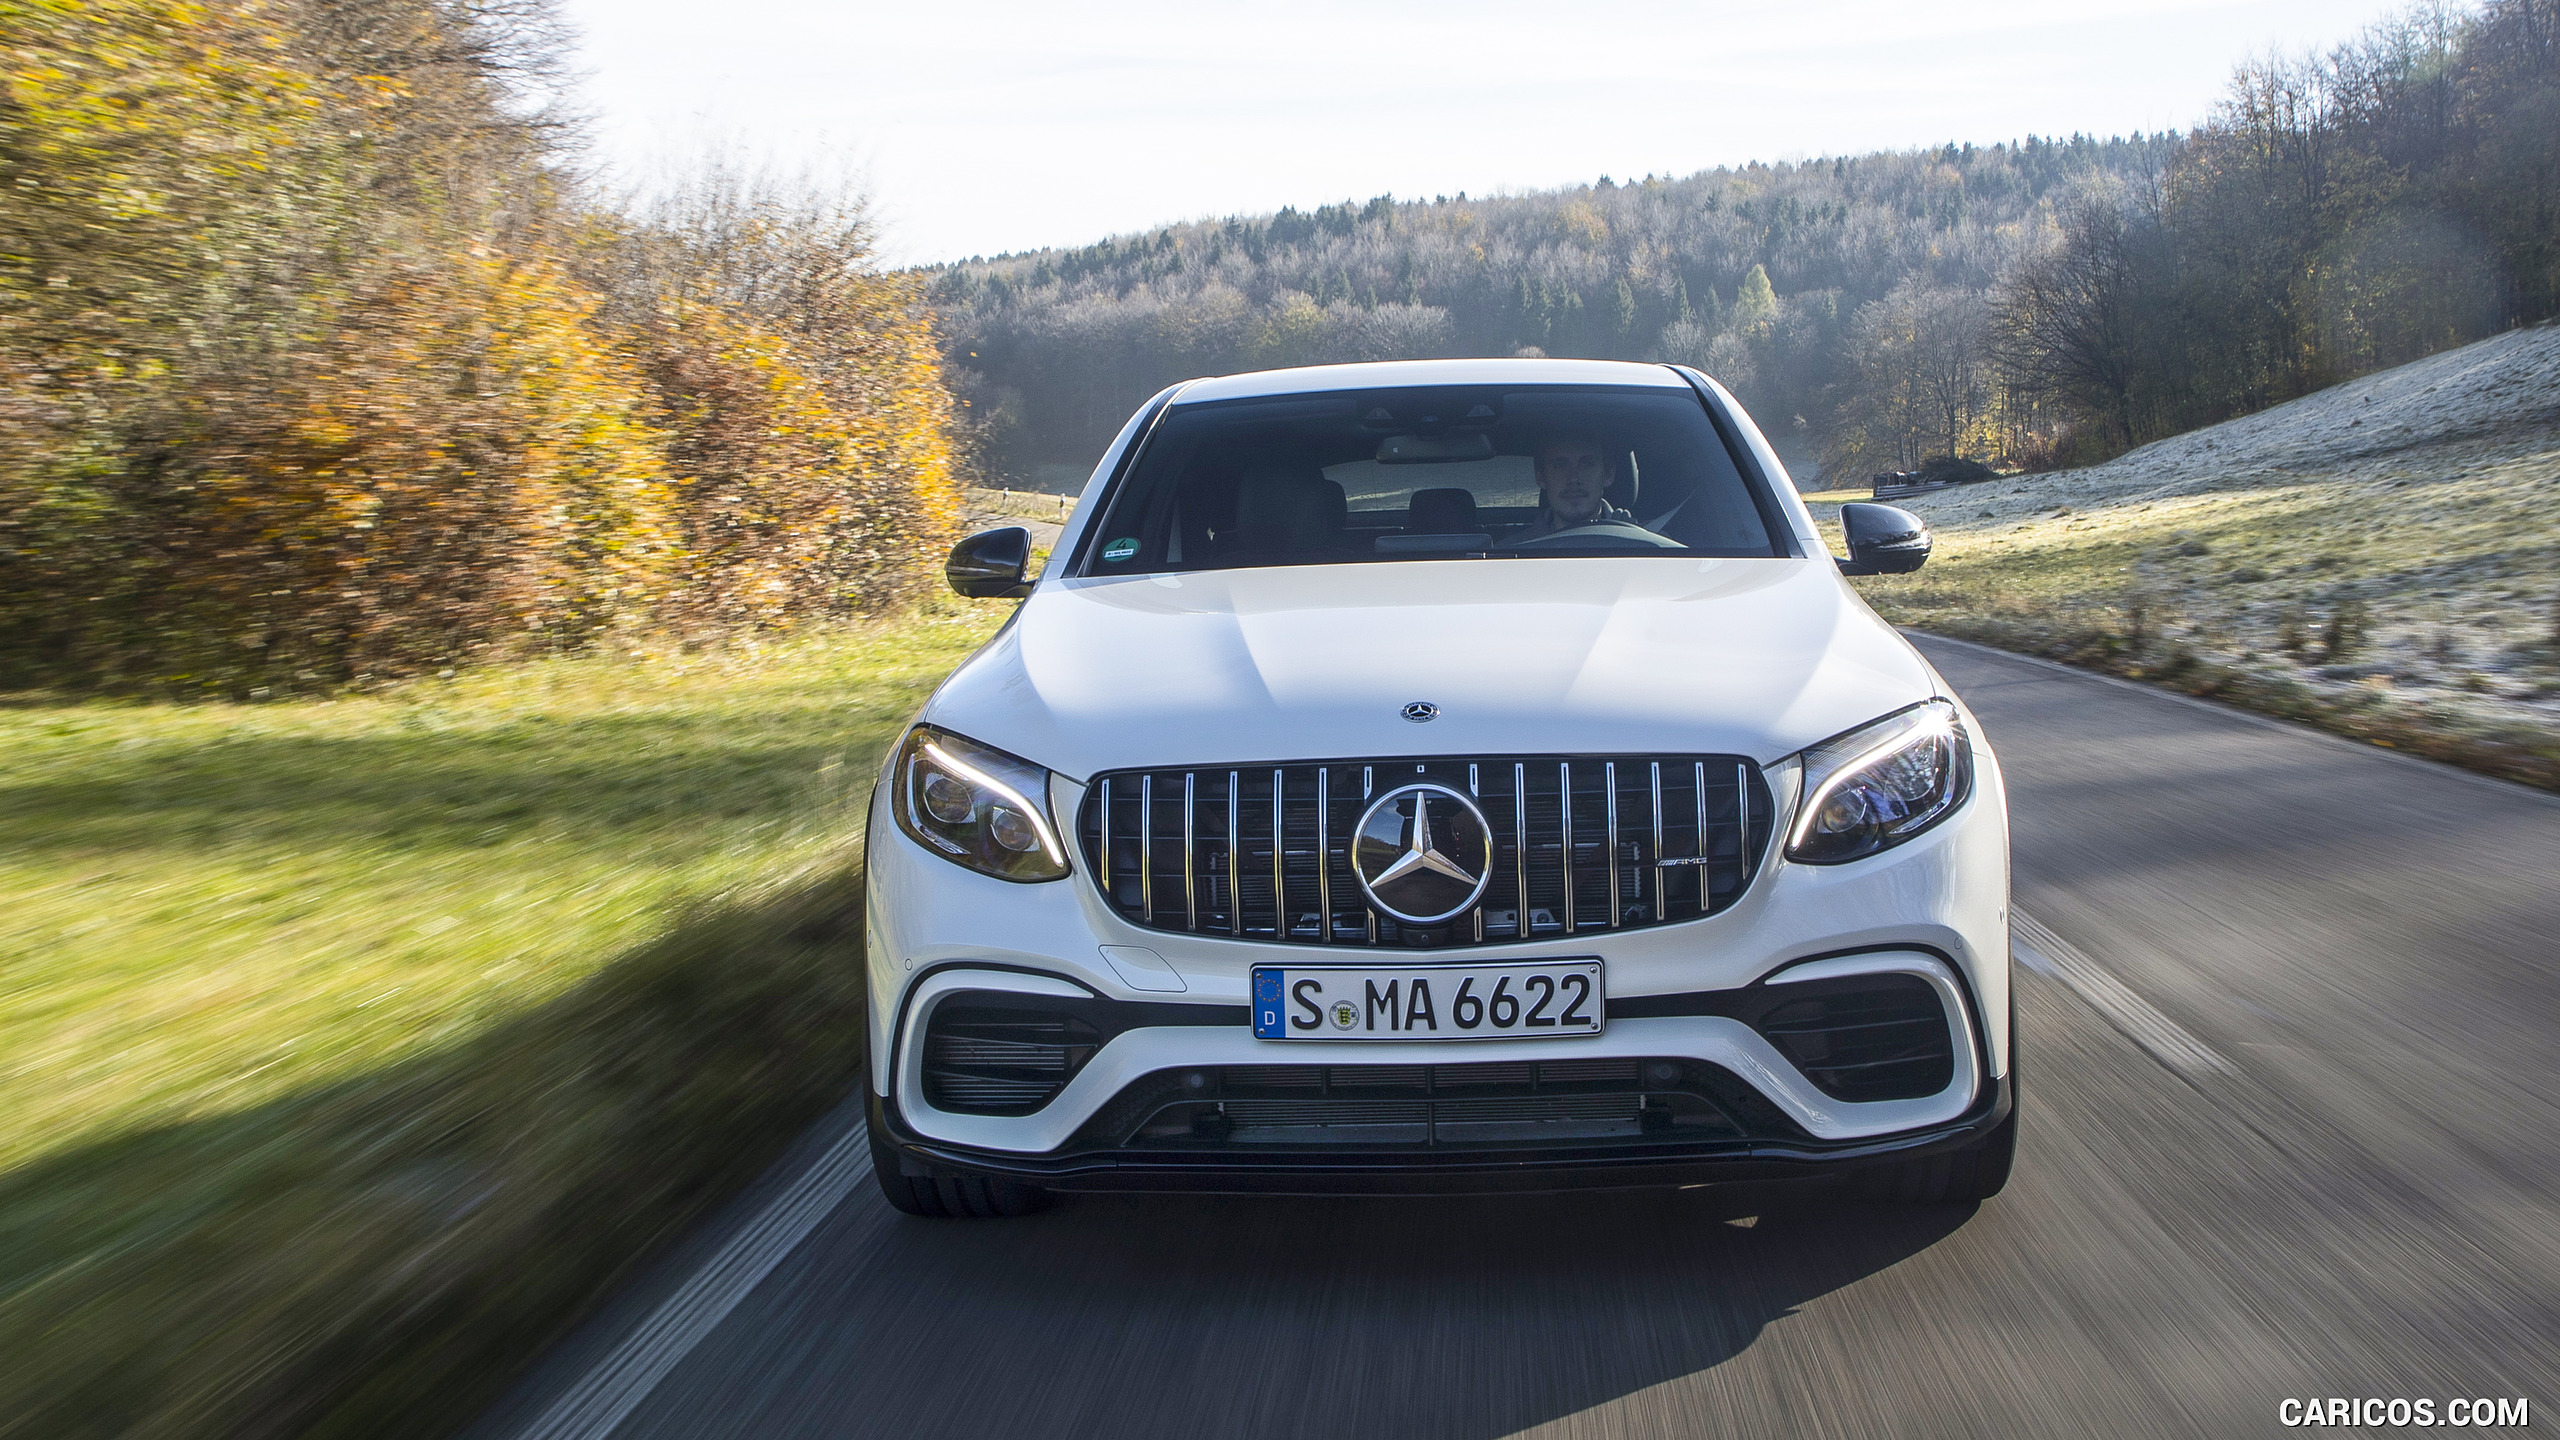 2018 Mercedes-AMG GLC 63 S Coupe - Front, #40 of 75